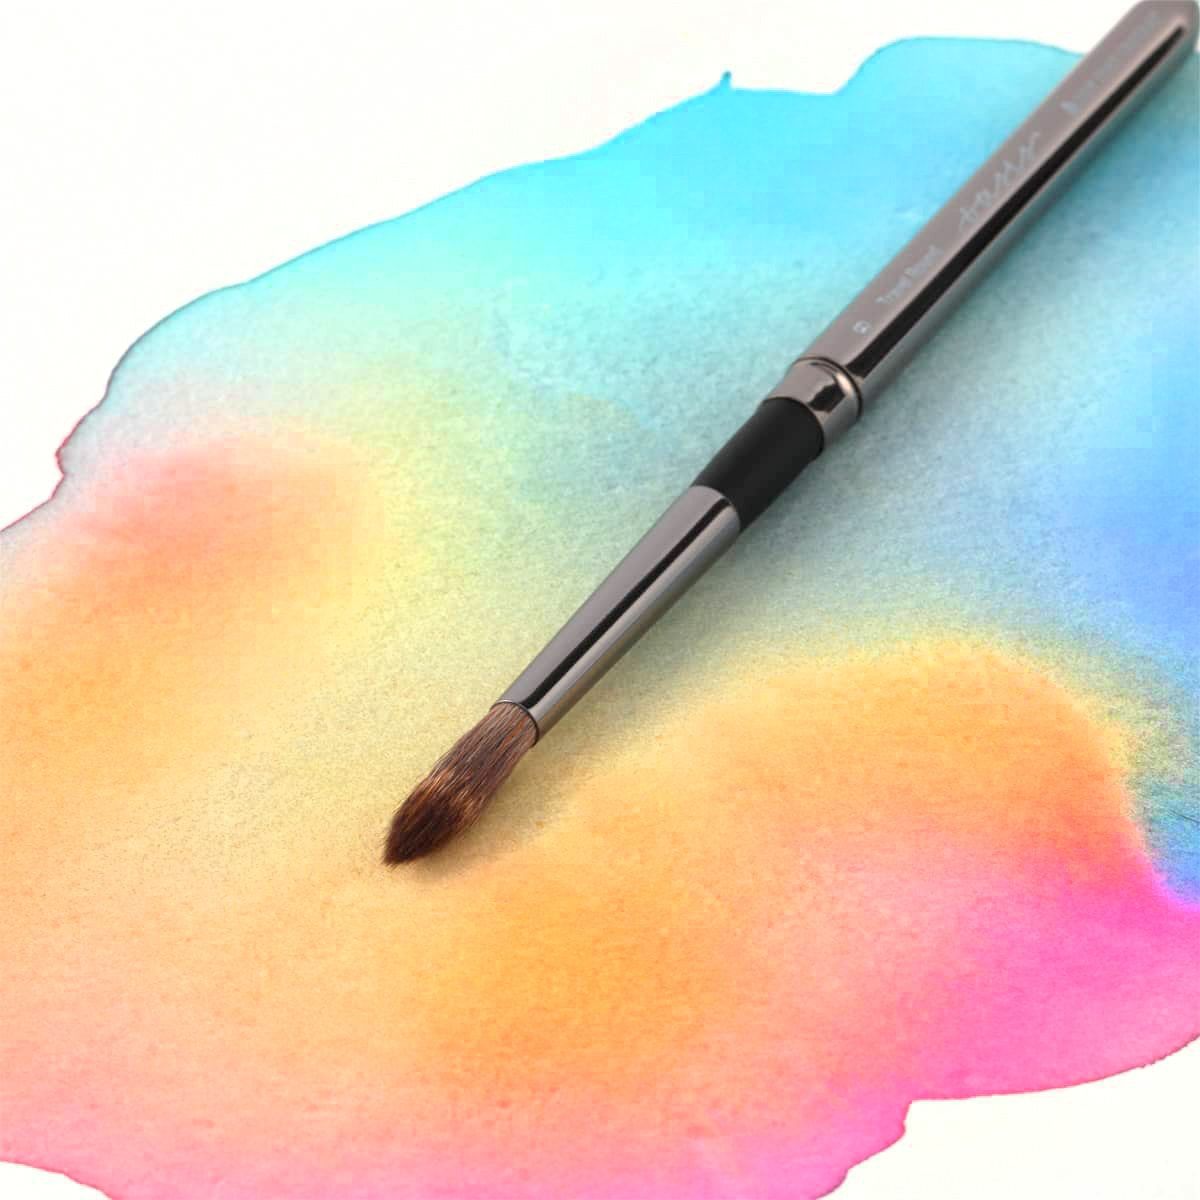 New York Central Oasis Synthetic Premium Brushes - Elite Professional  Watercolor Brushes for Artists, Painting, Students, Studios, & More! -  [Dagger Striper - 1/2] 